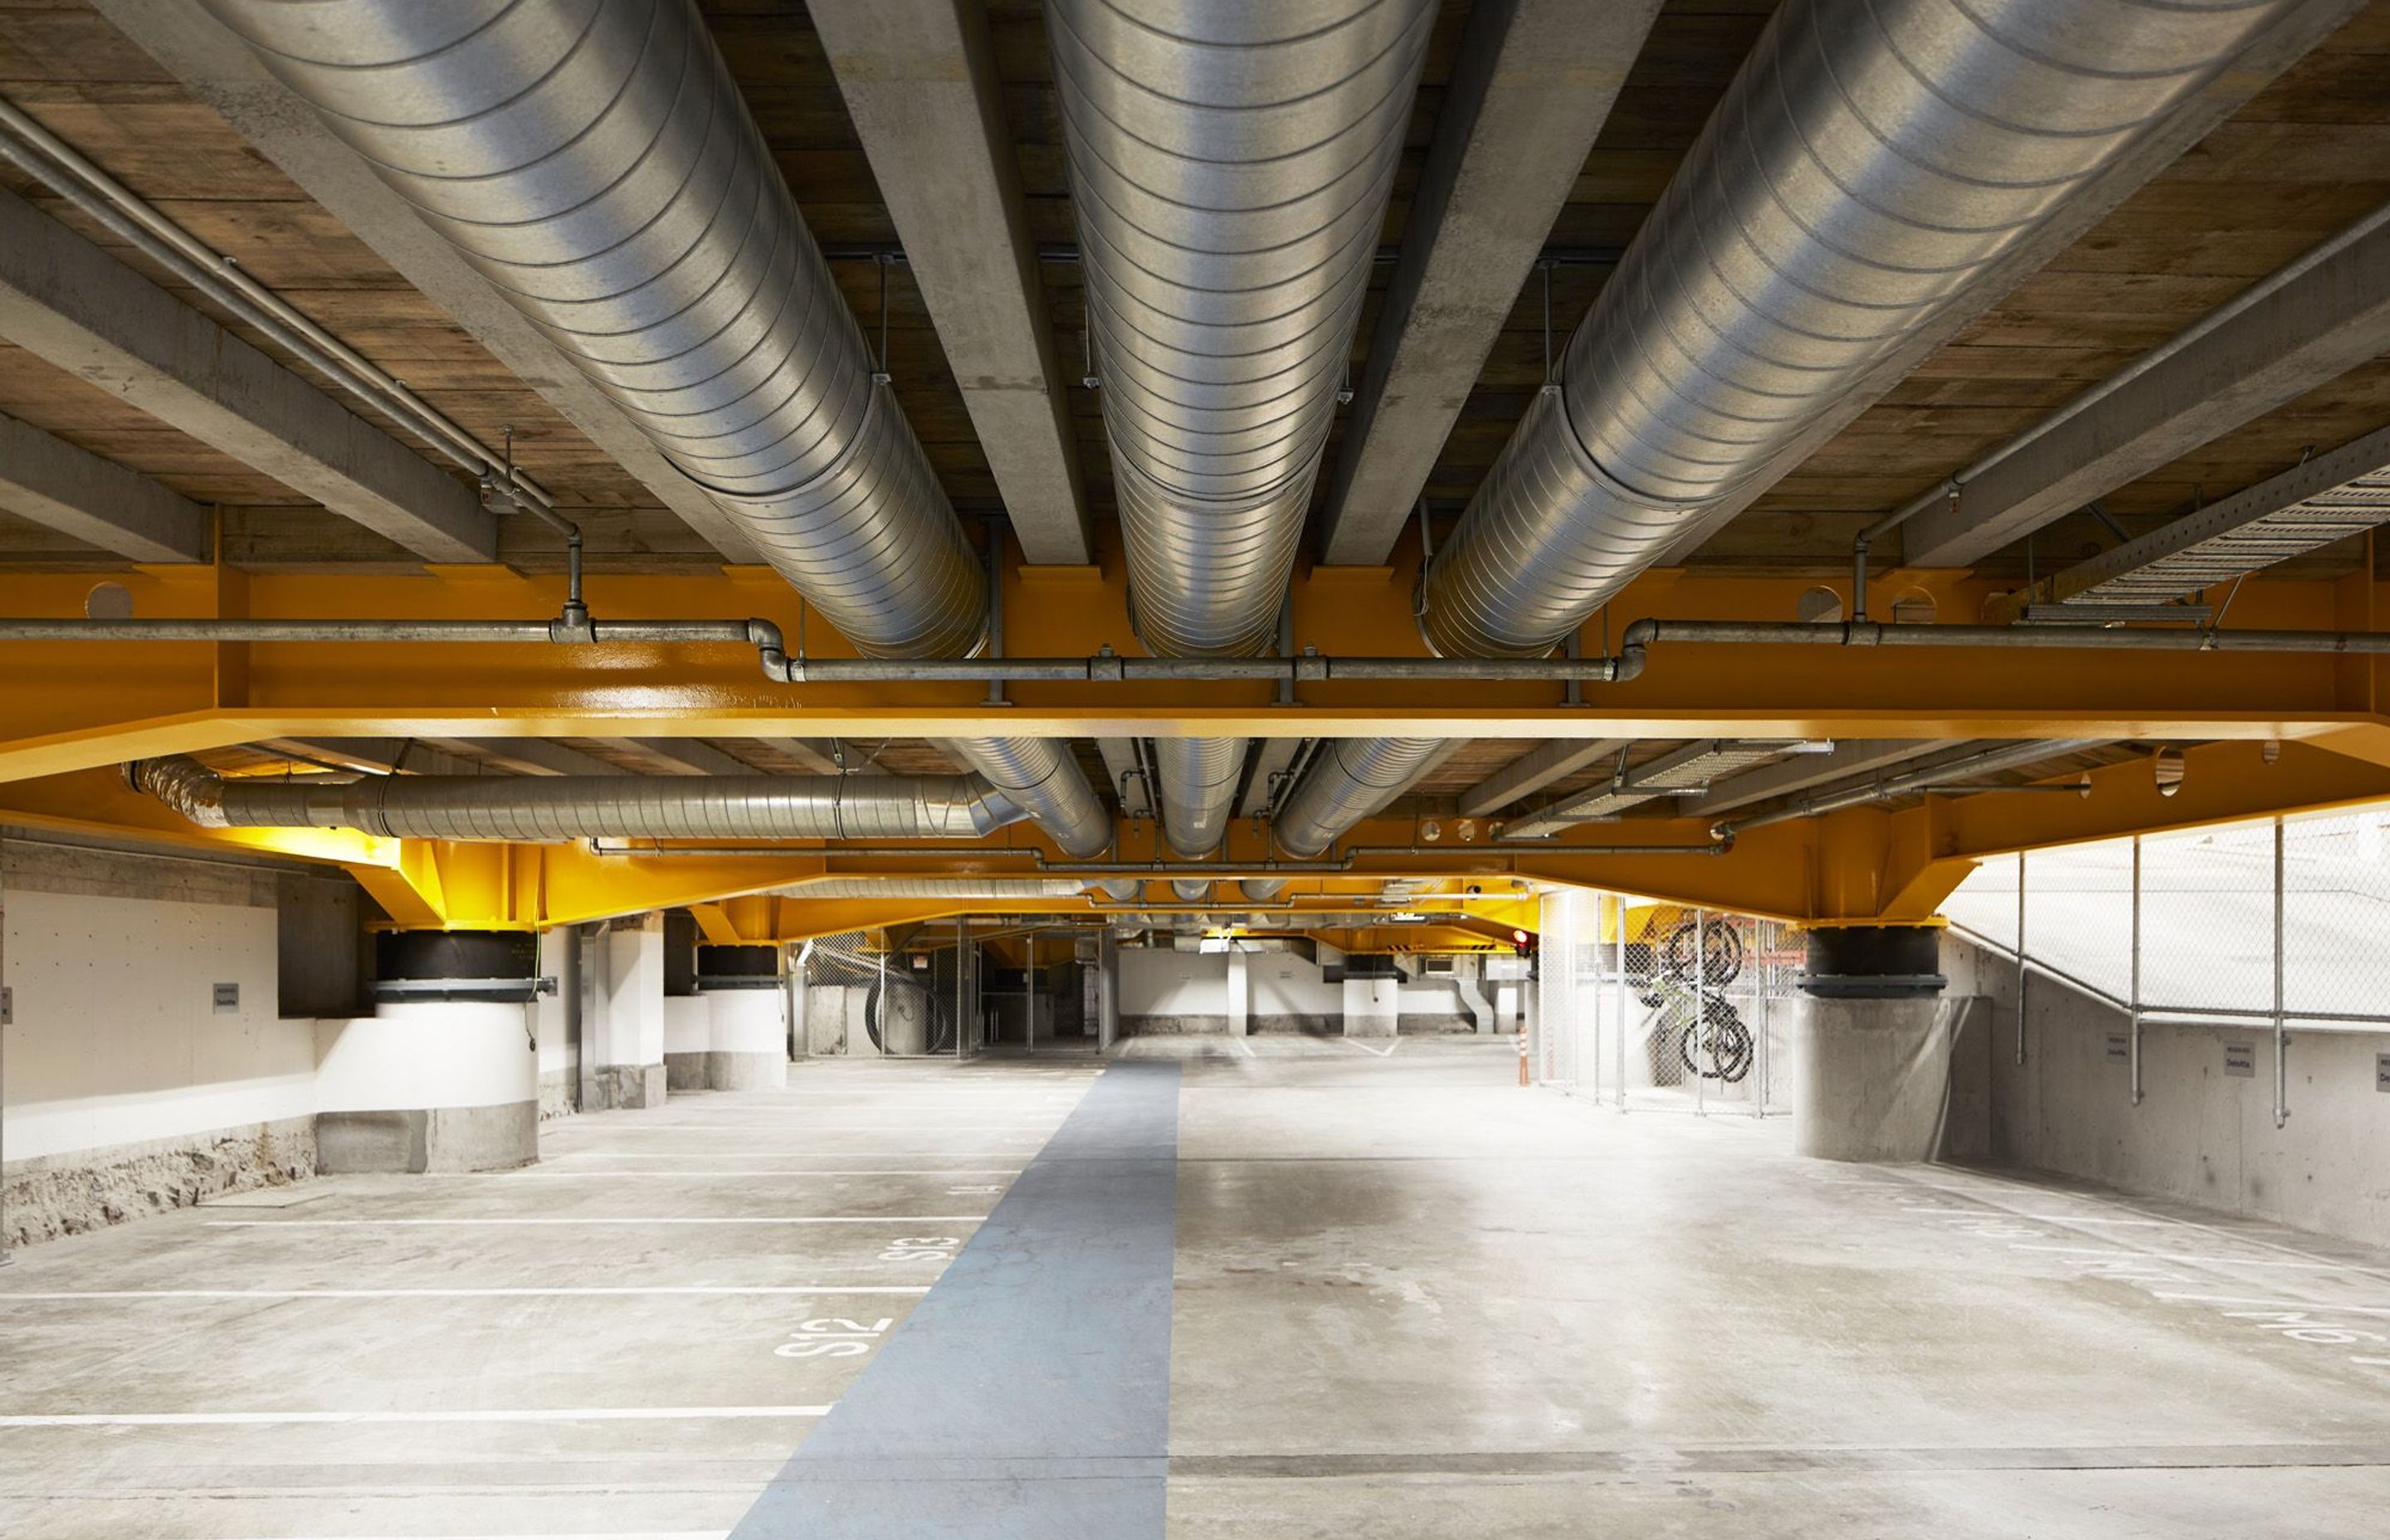 In the basement, the base isolators hold the weight of the building and allow the foundations to move sideways.